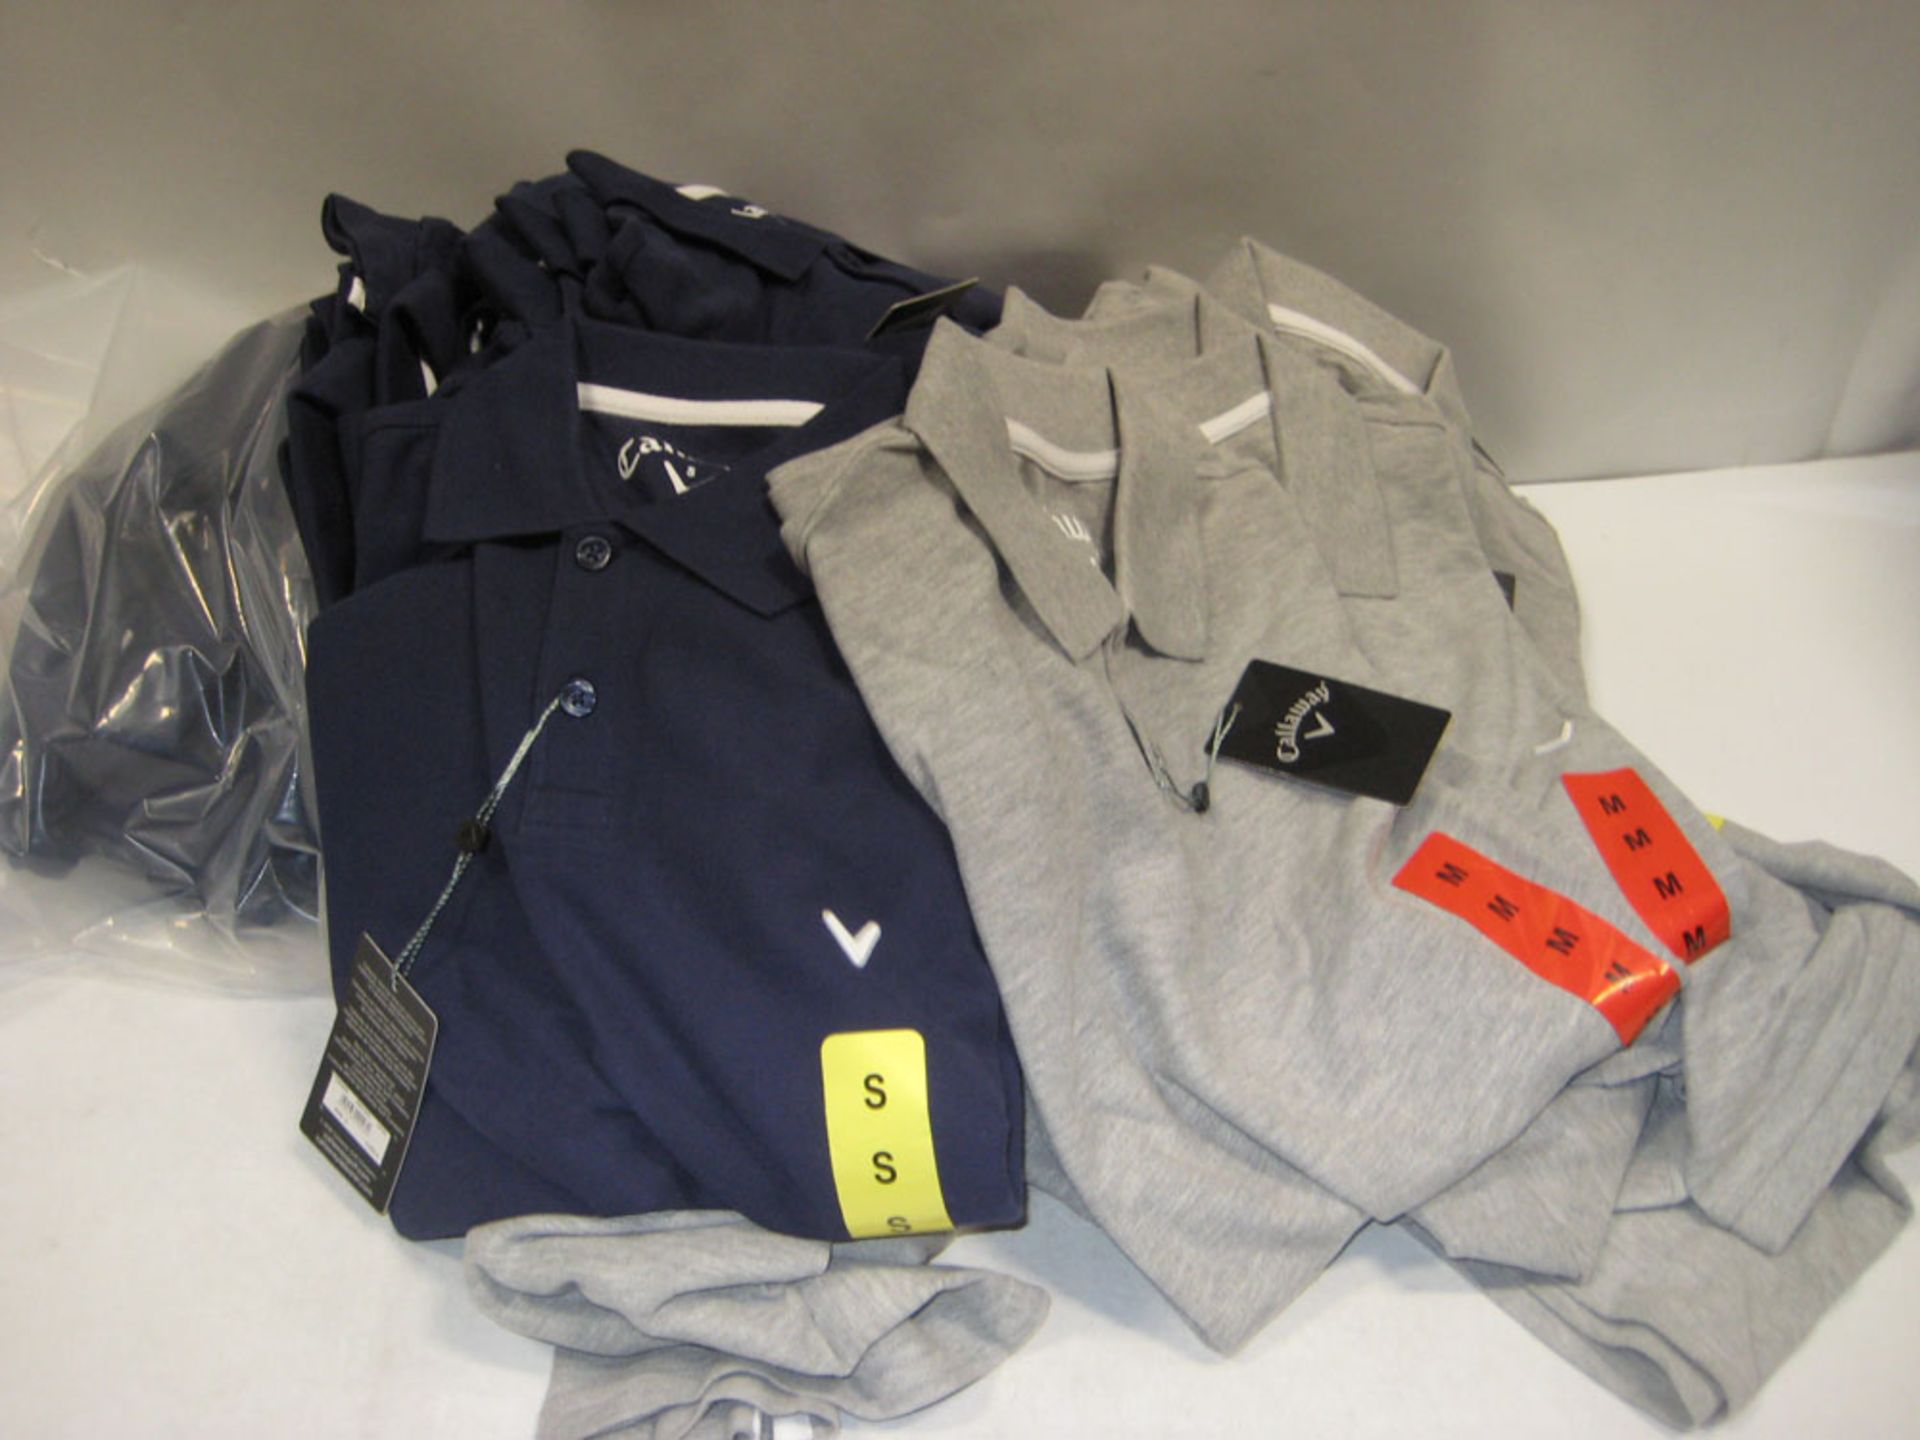 Bag containing approx. 24 Calloway polo shirts, sizes ranging from S to M in dark blue and grey